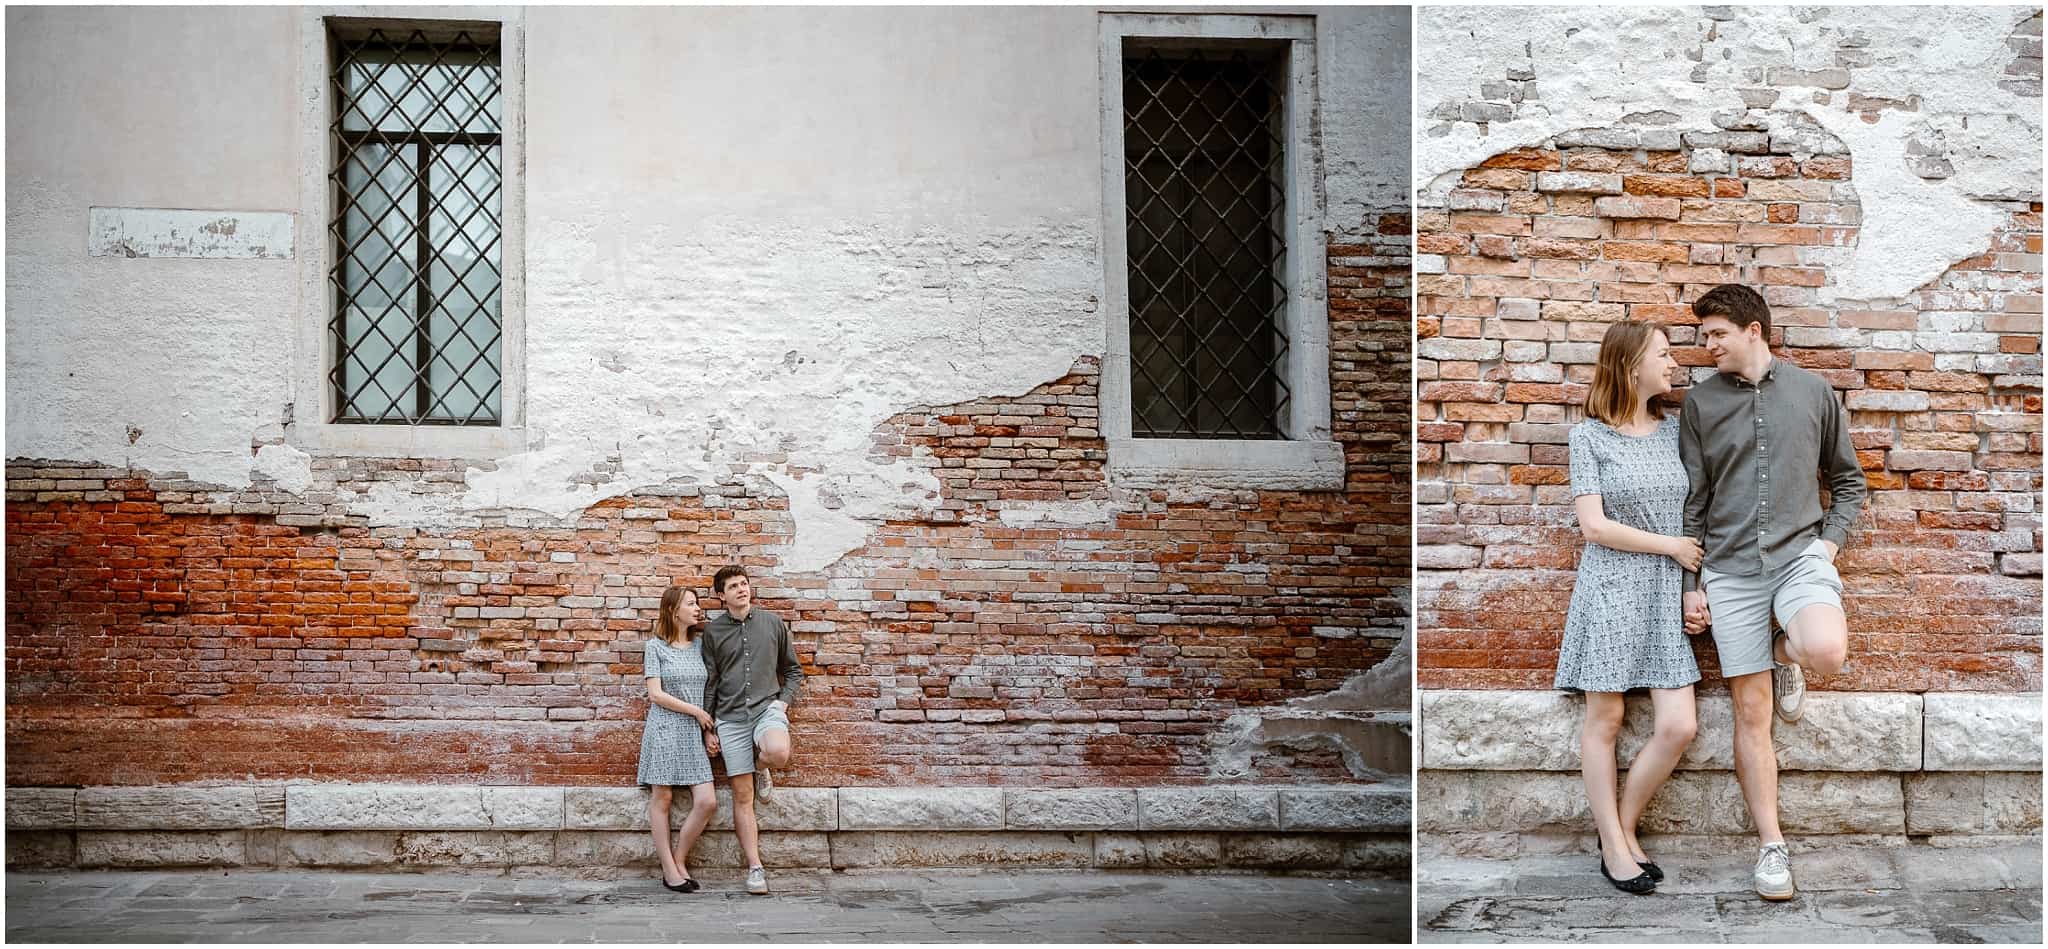 Engagement photo session in the alleys of Venice